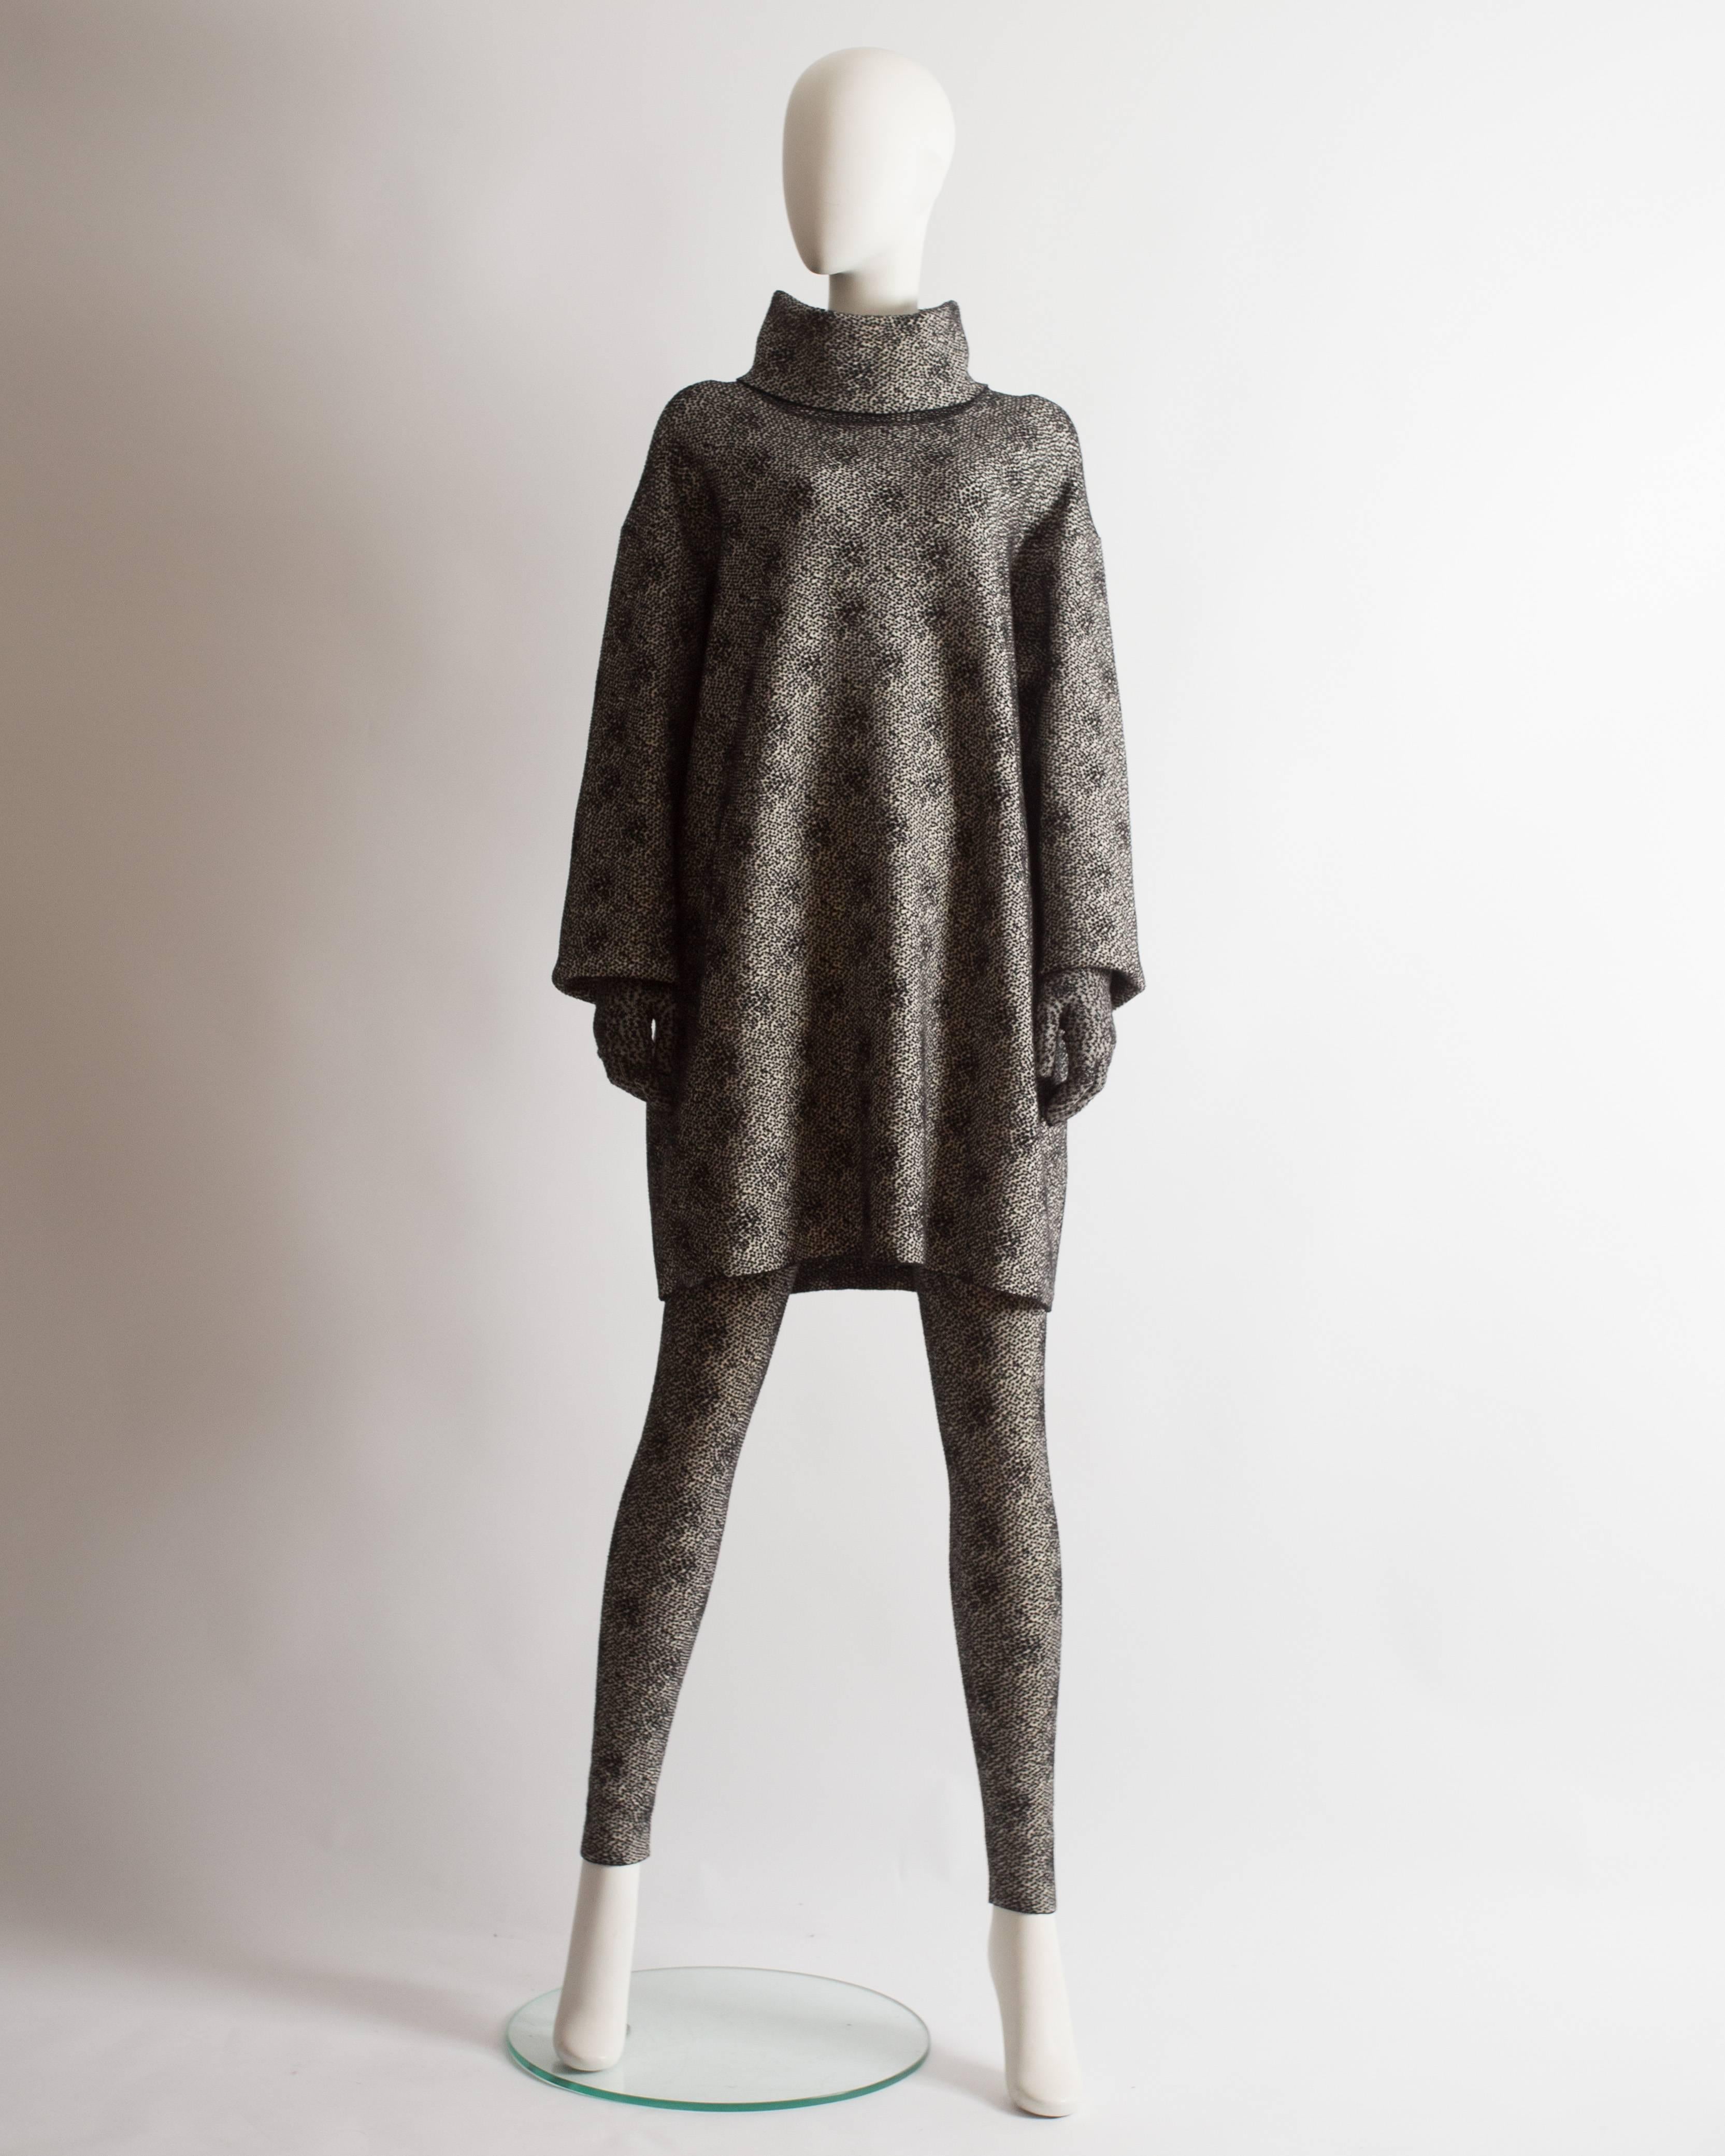 Alaia three piece ensemble. Oversized sweater dress with high turtle neck and two zip fastenings, high waist fitted leggings and matching gloves. 